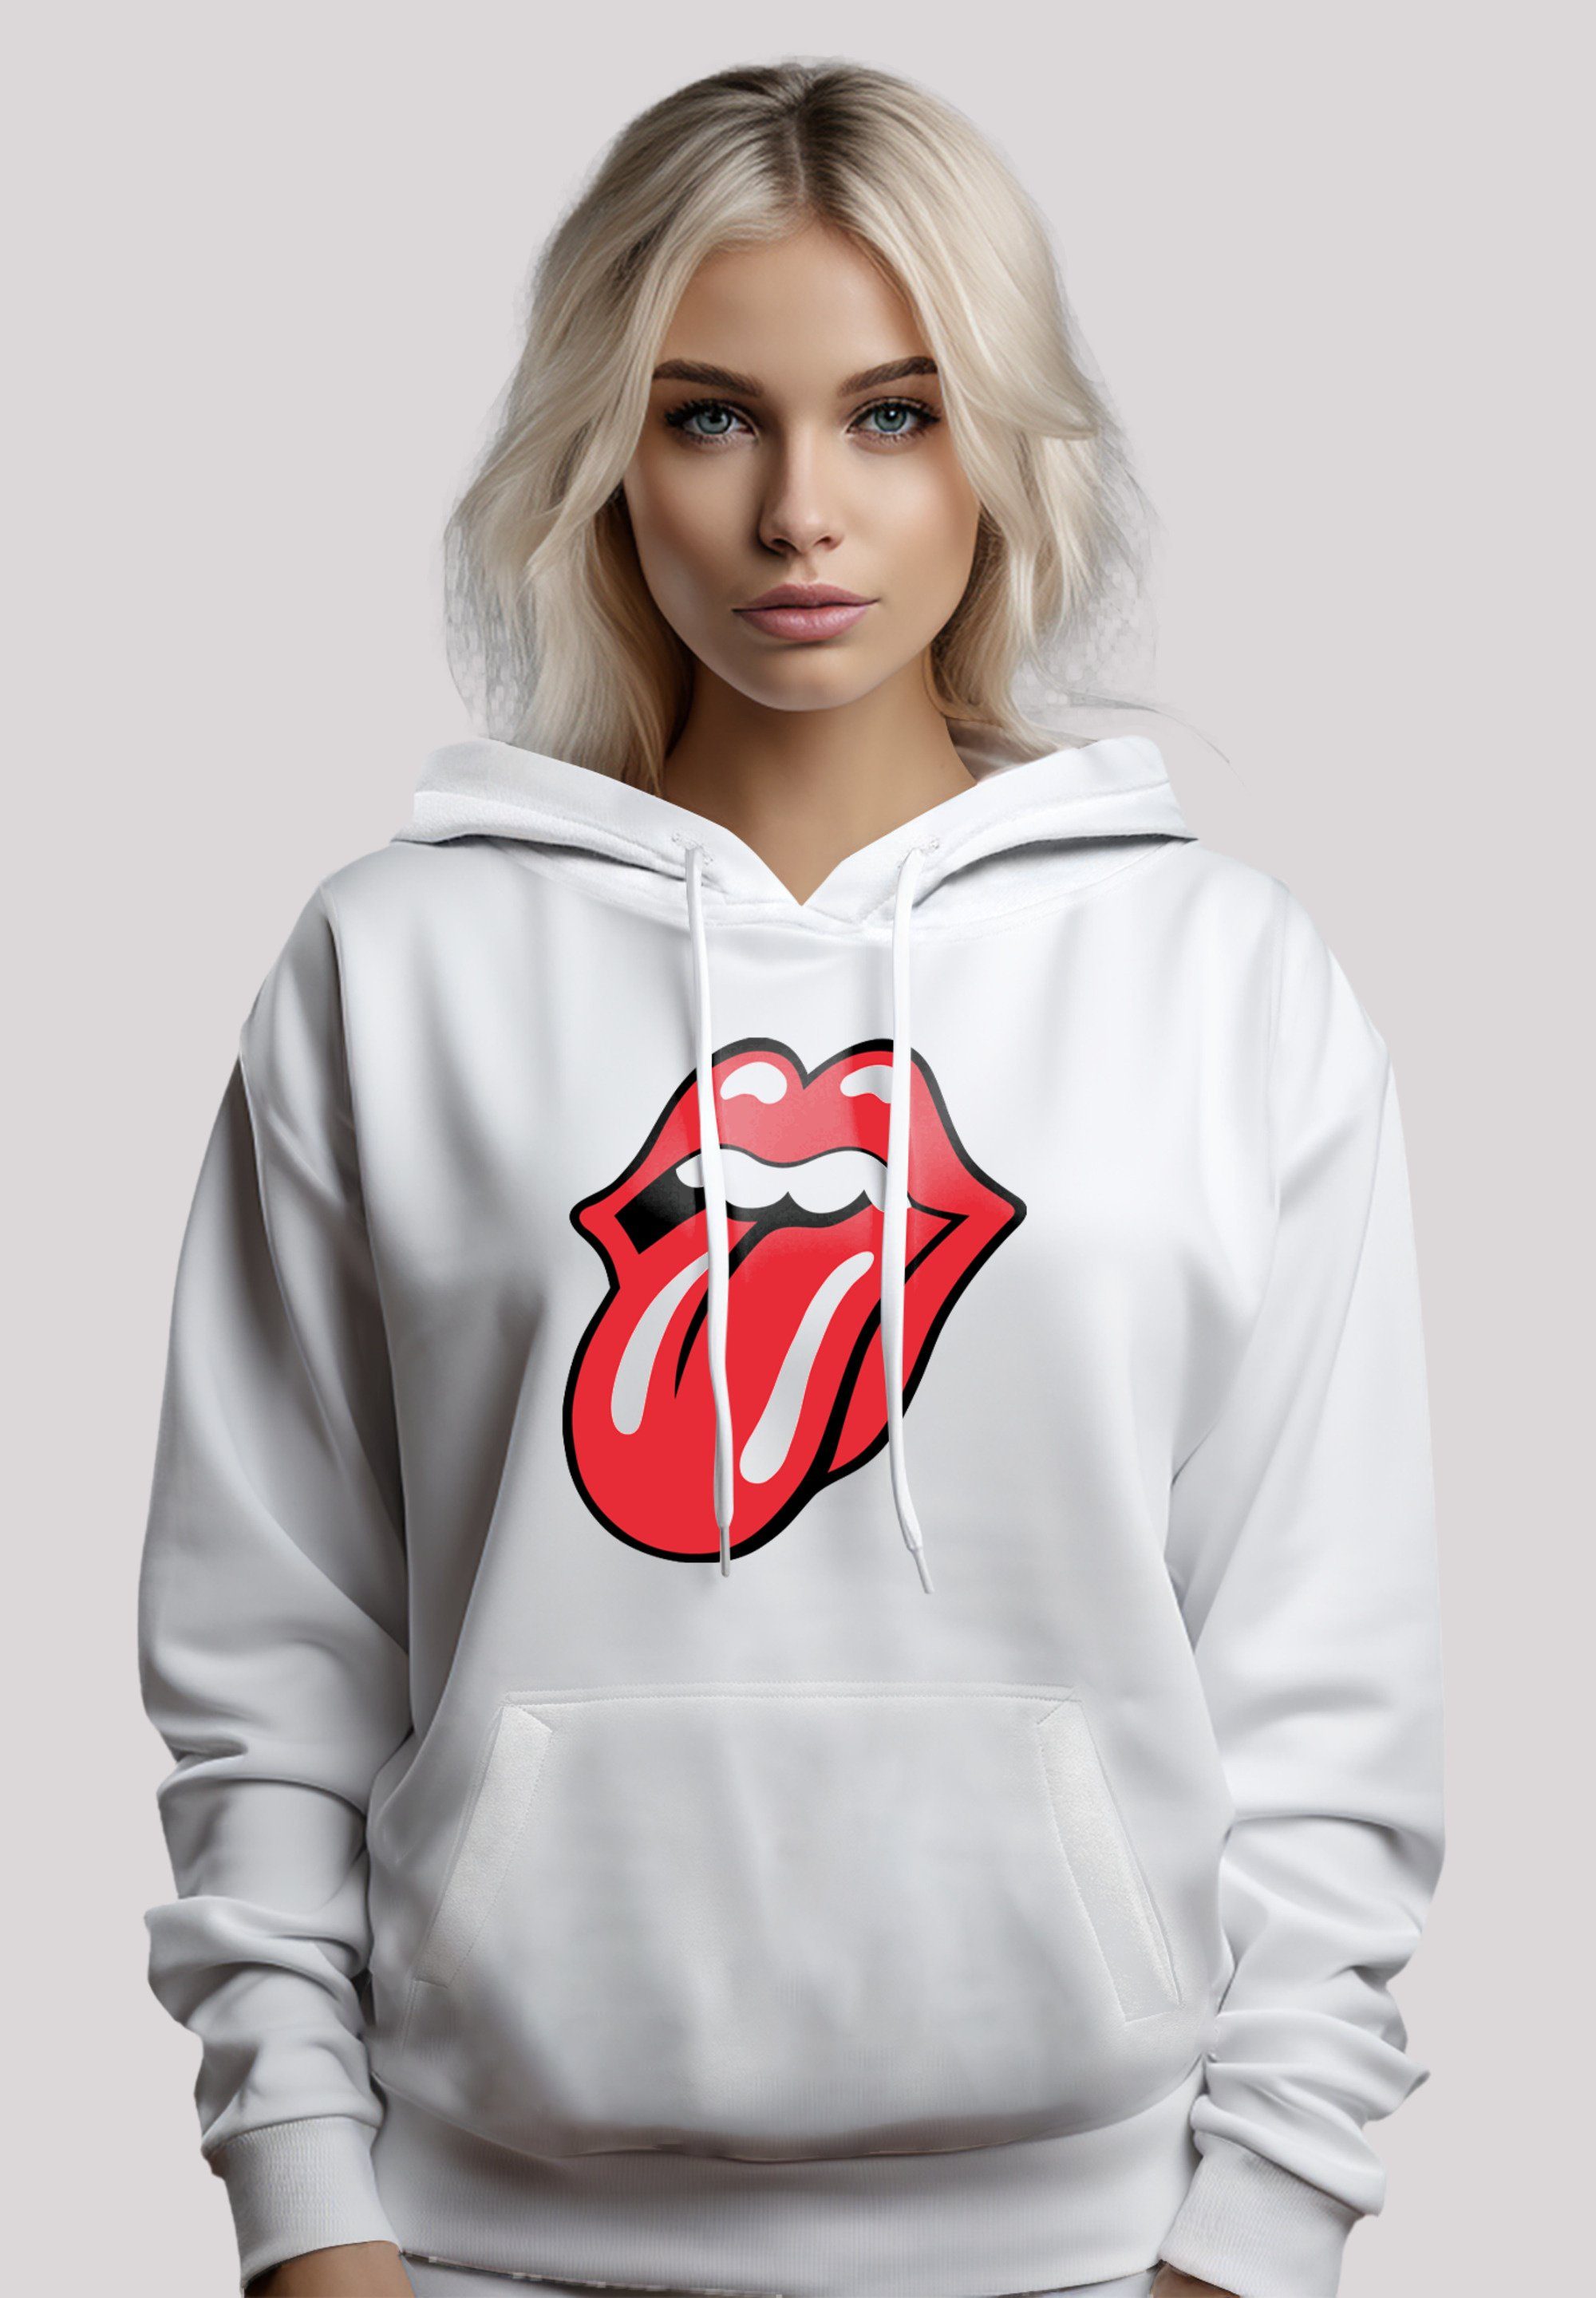 F4NT4STIC Kapuzenpullover The Rolling Stones Classic Zunge Rock Musik Band Hoodie, Warm, Bequem weiß